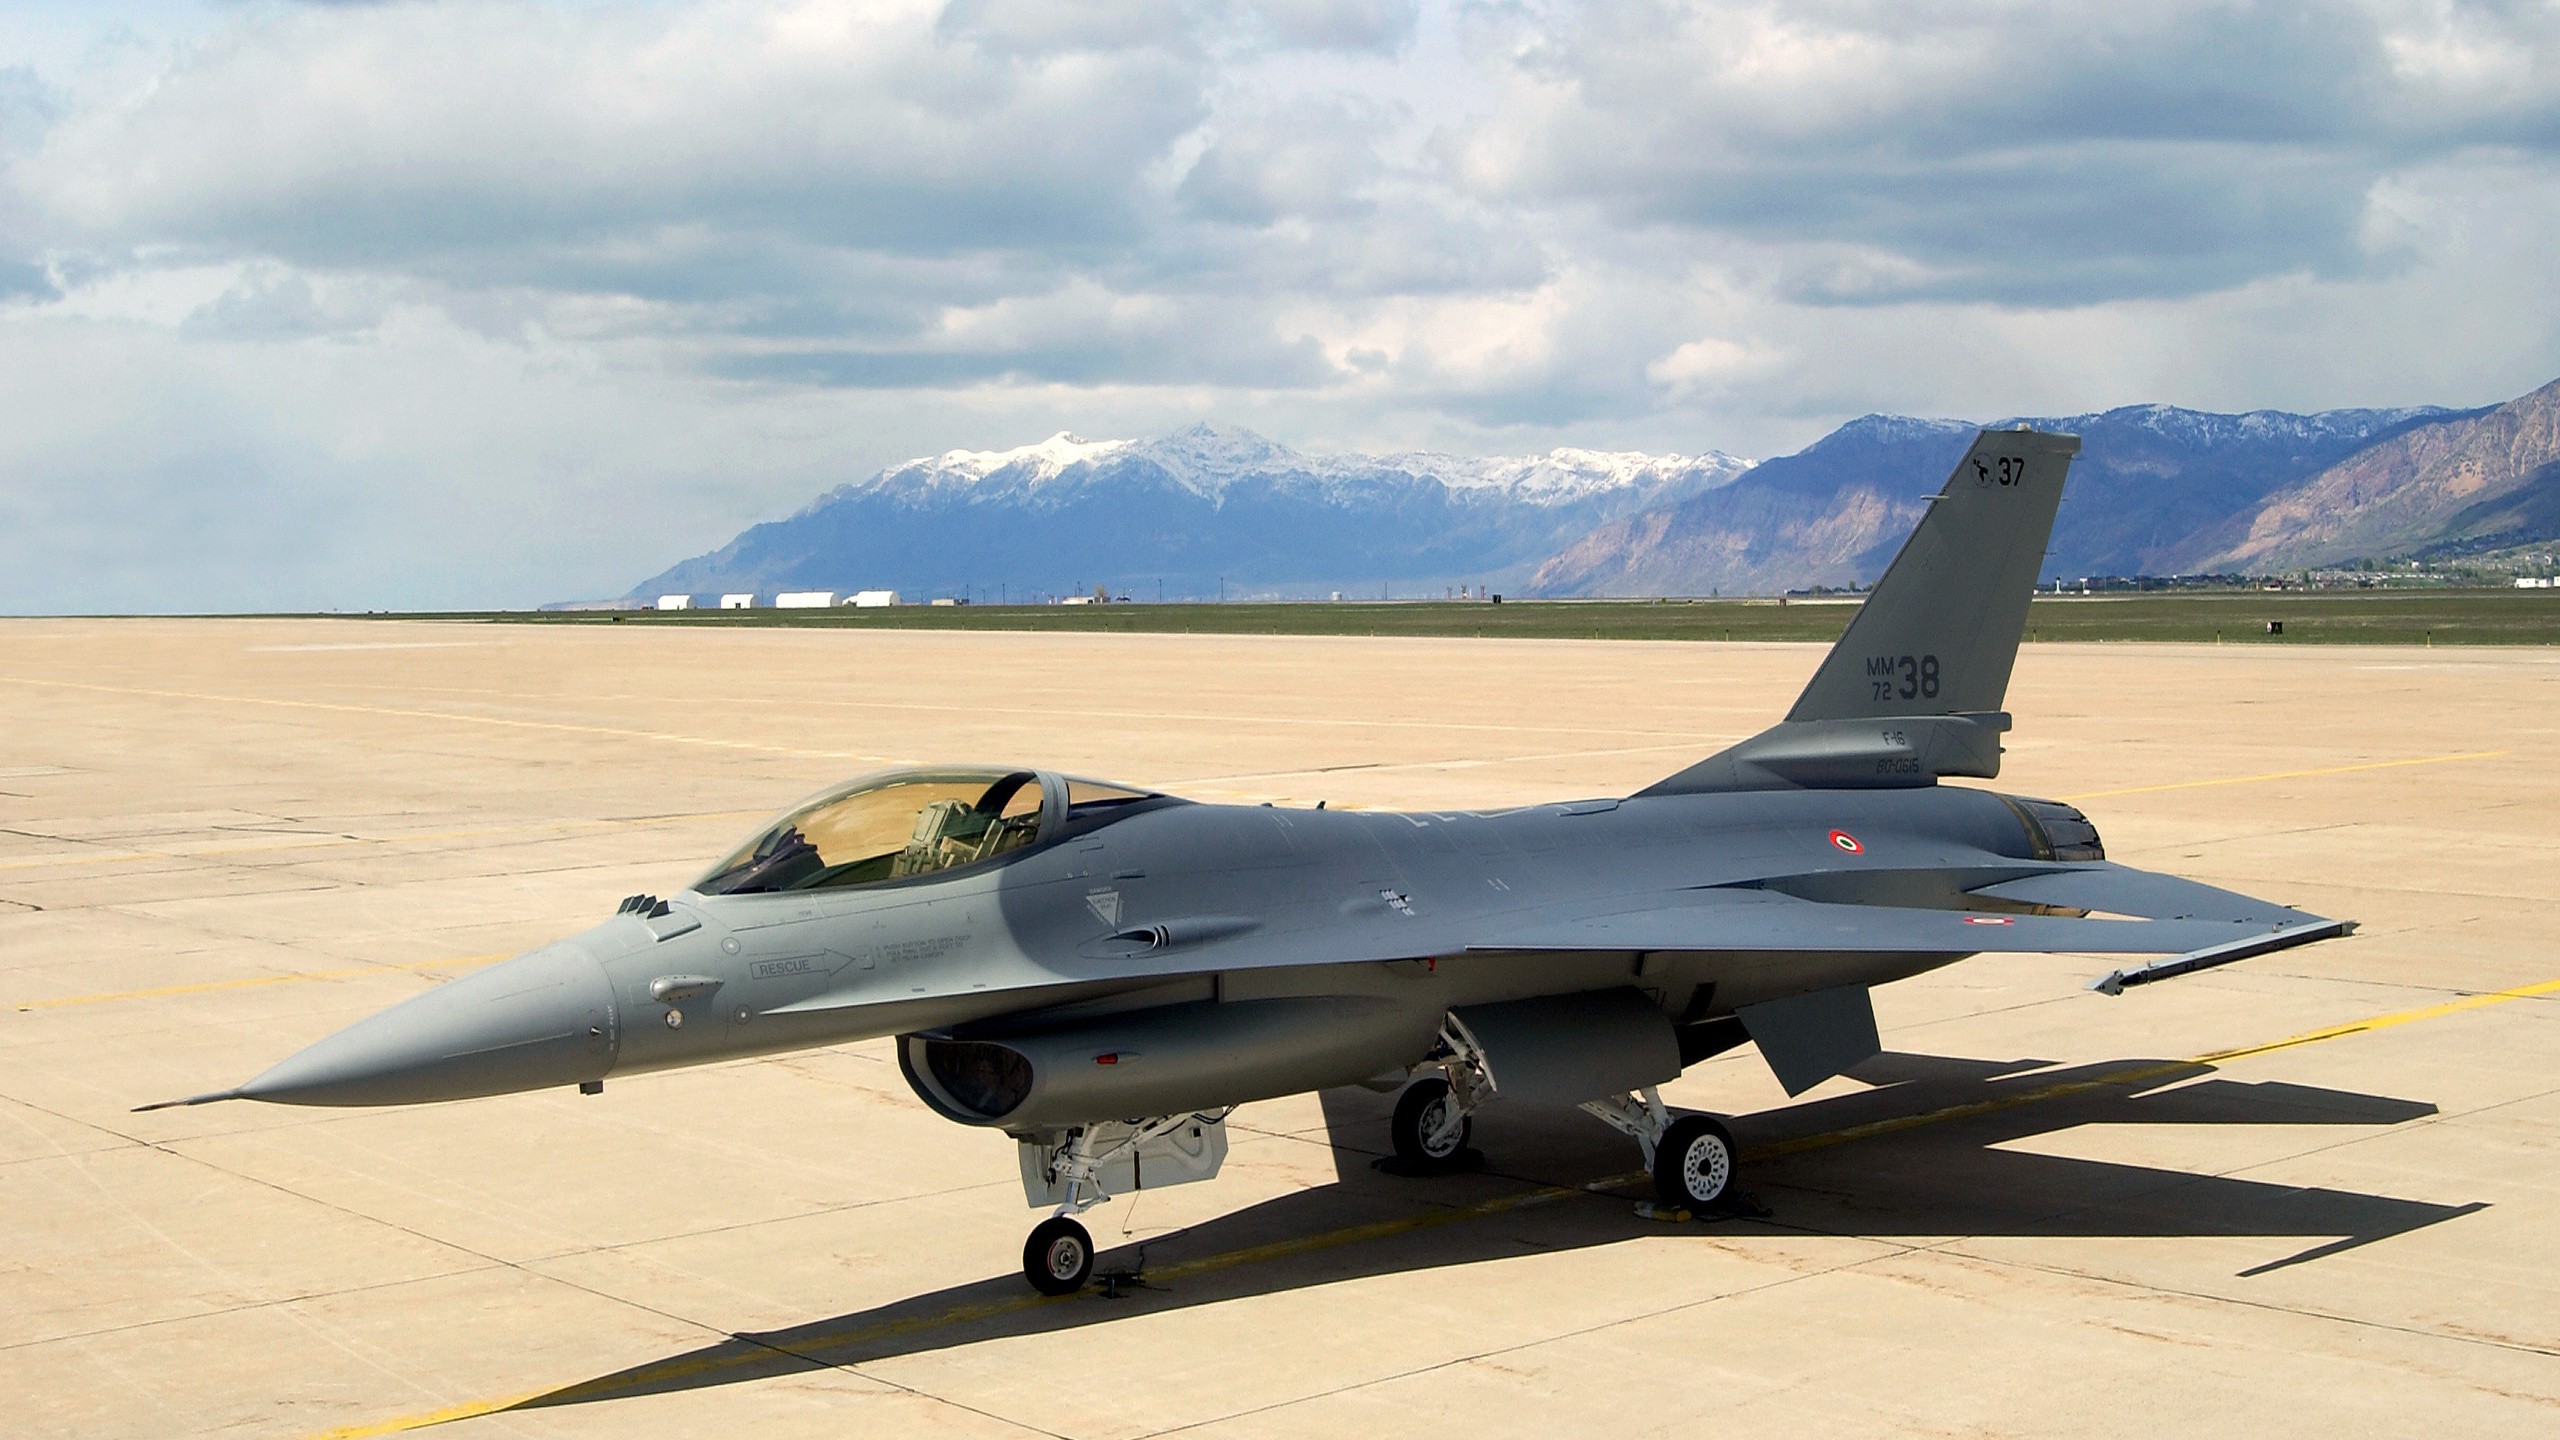 General 2560x1440 air force General Dynamics F-16 Fighting Falcon Italian aircraft military military aircraft vehicle military vehicle